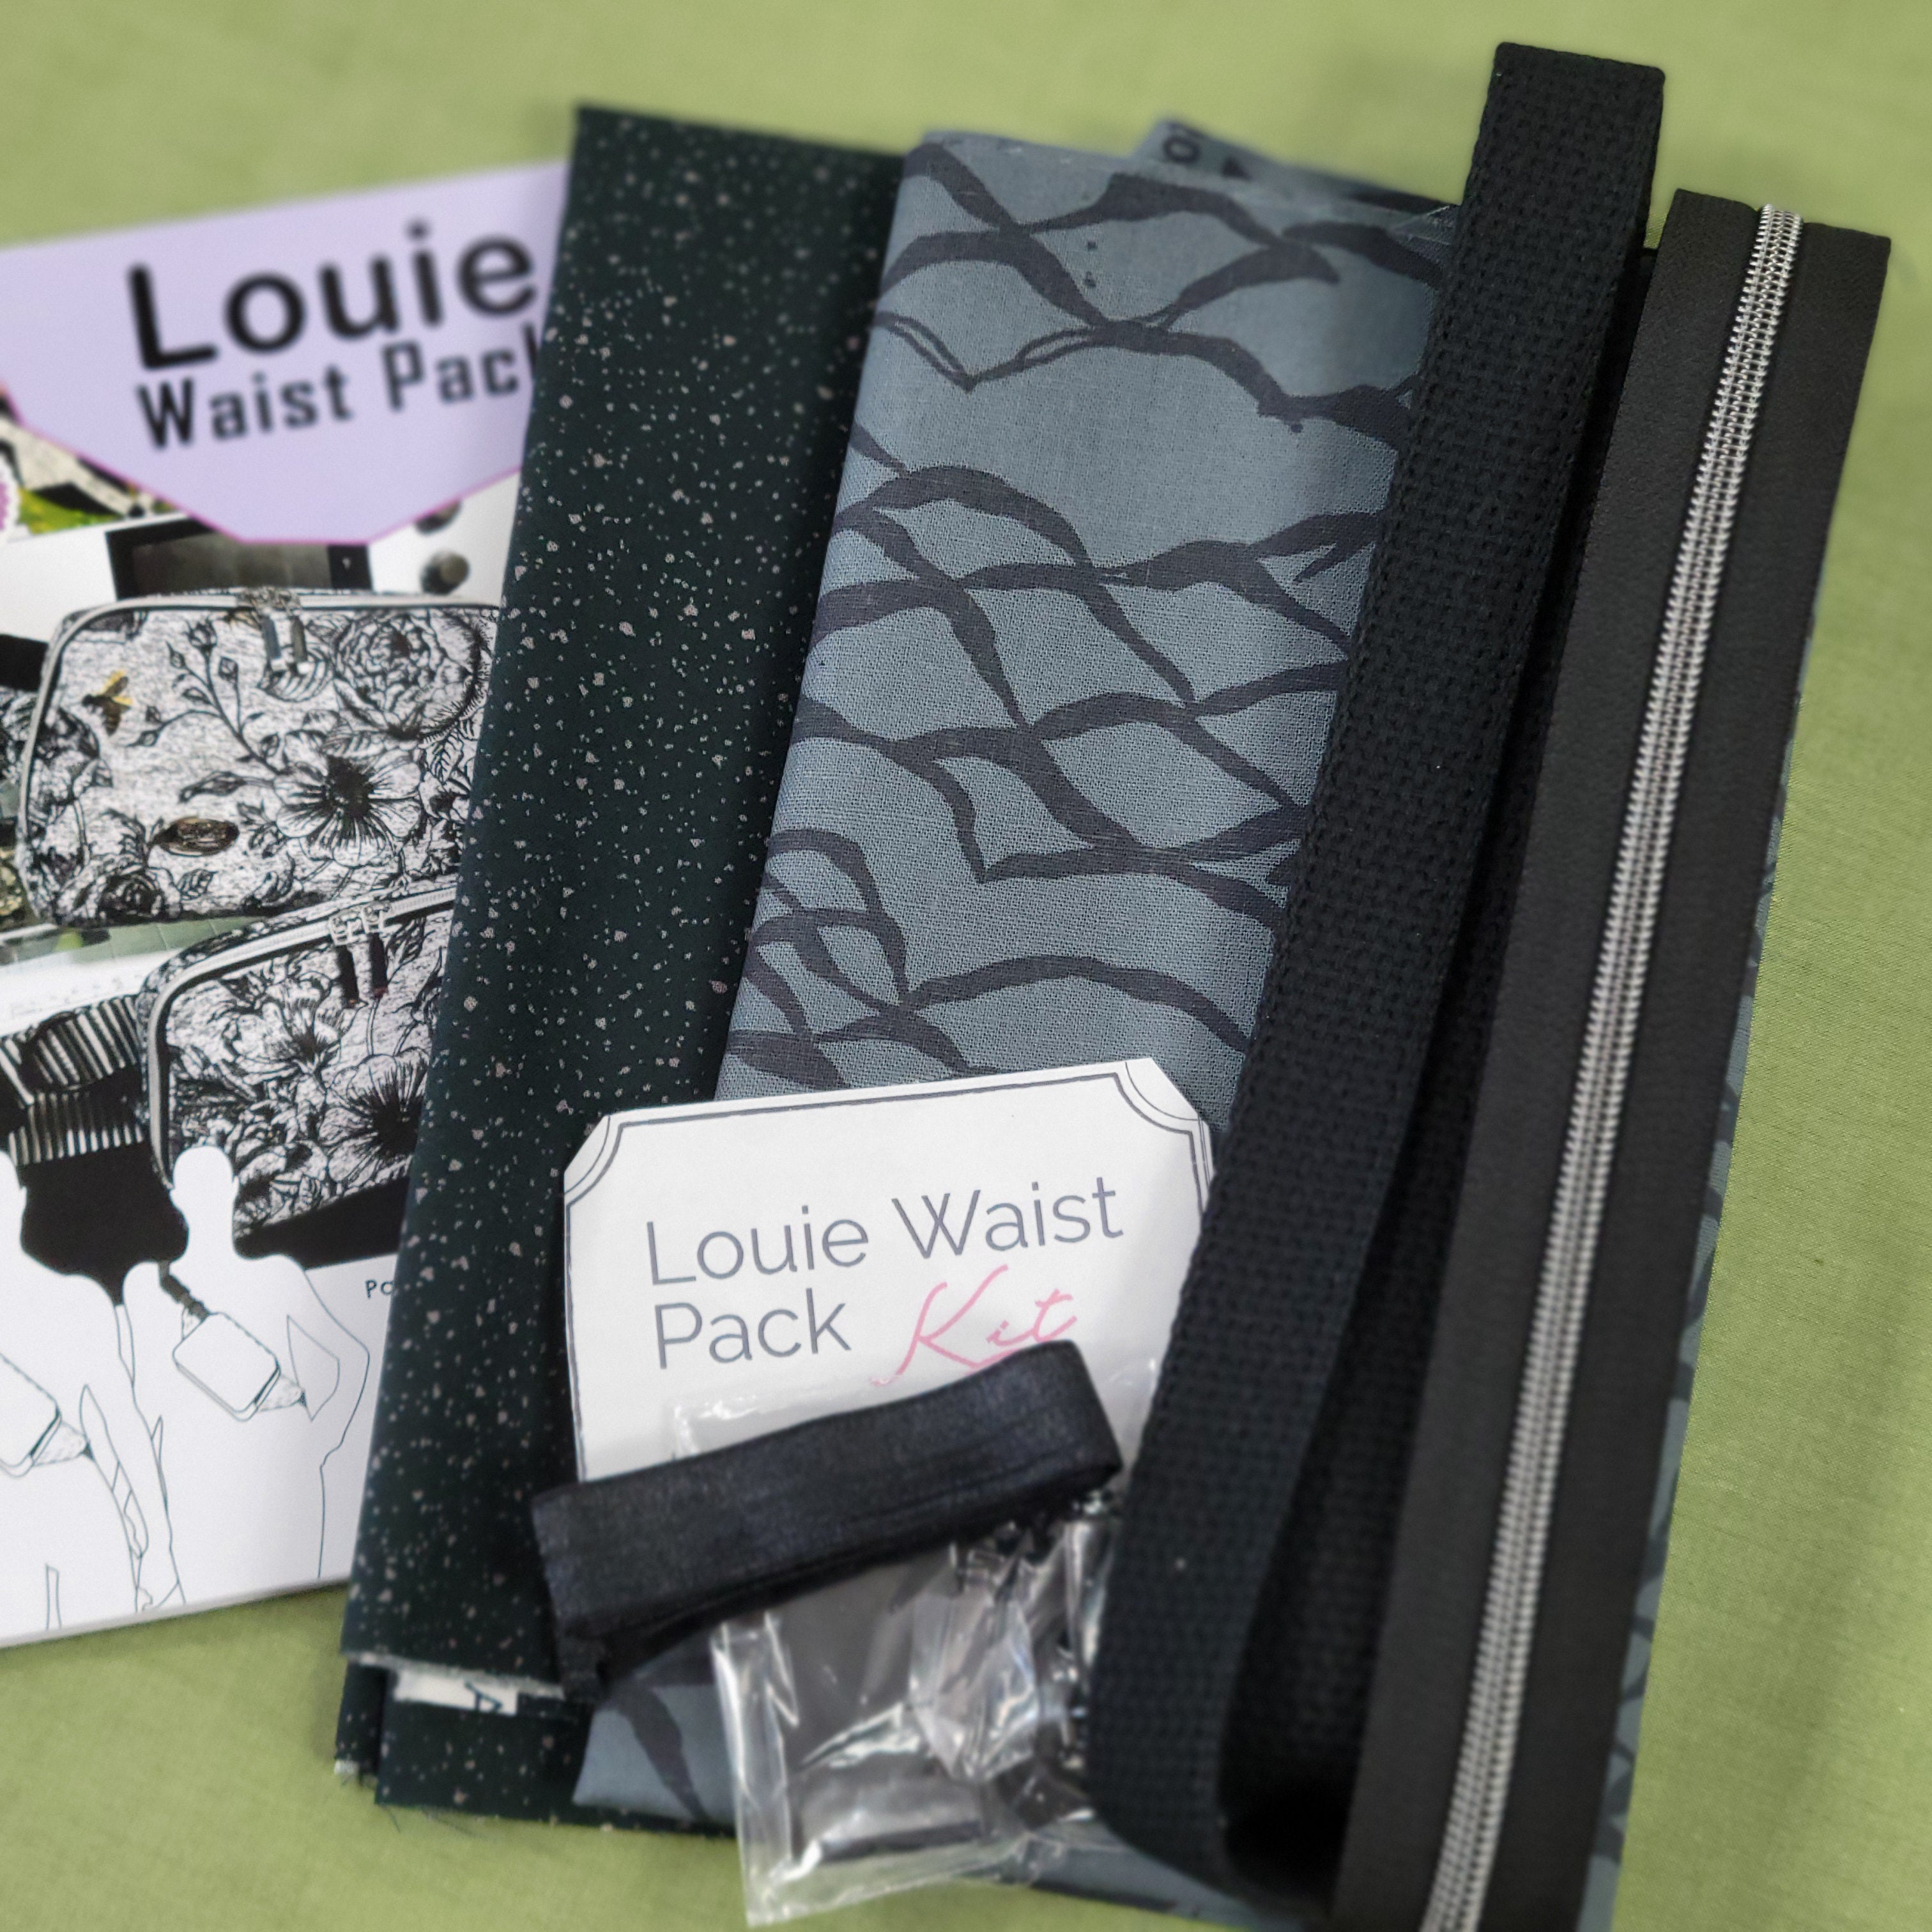 Louie Waist Pack (Pattern by Uh Oh Creations) in Black - Out of Hand Shop-Curated Bag Kits